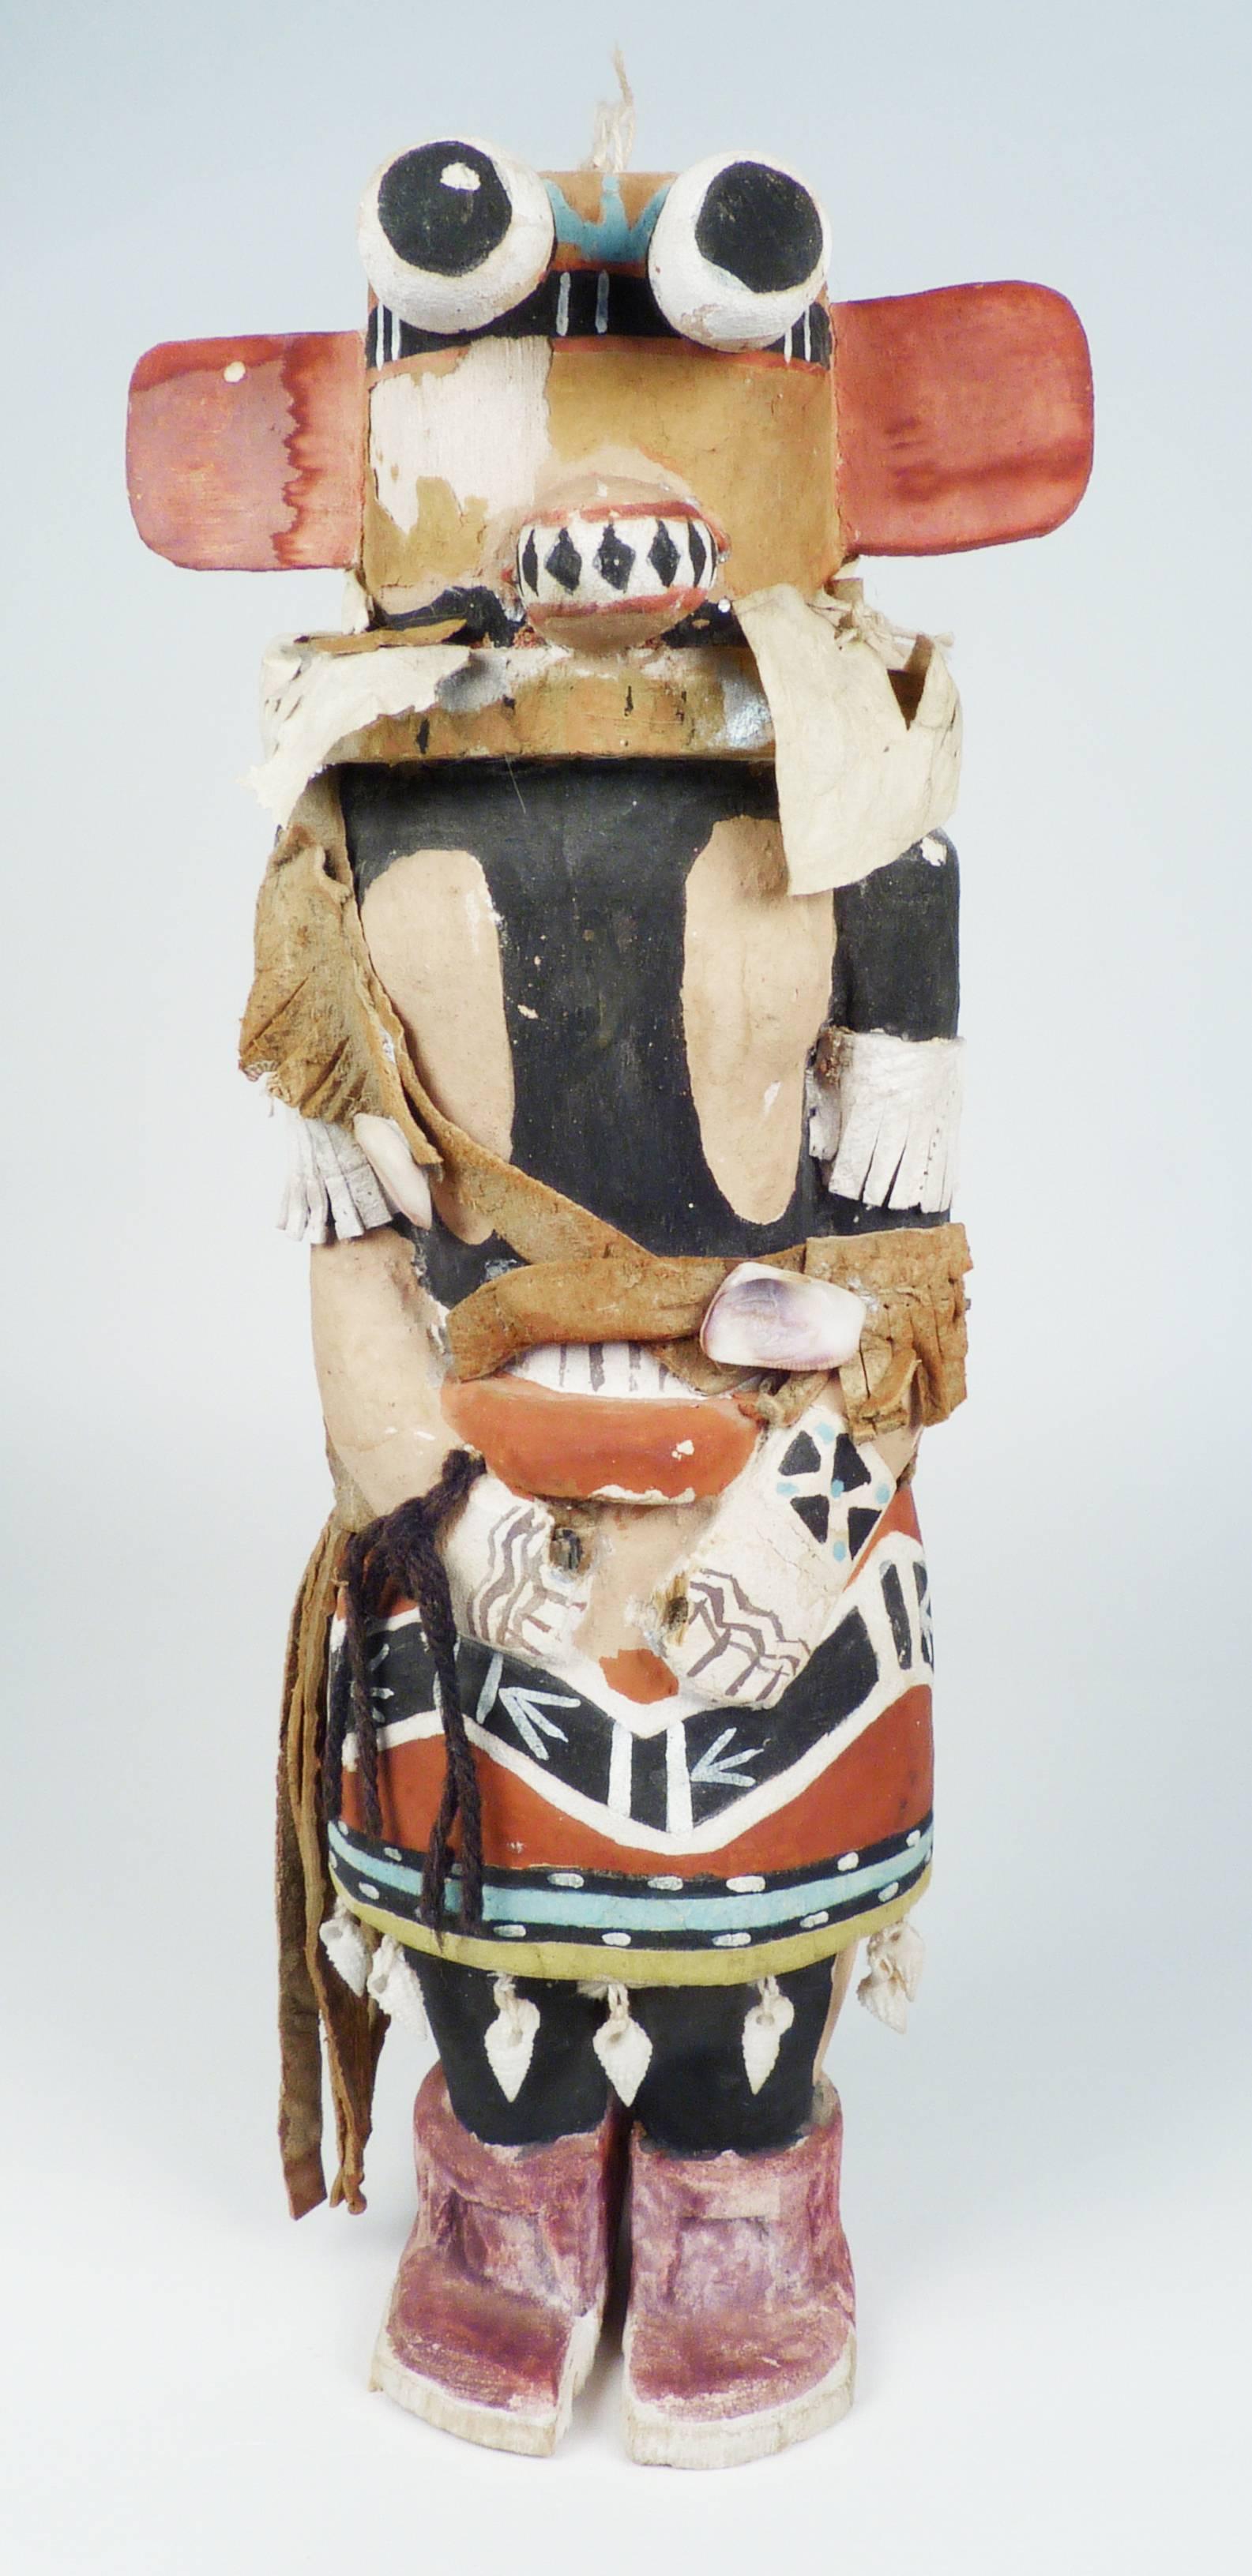 This is a traditional Hopi kachina doll carved from a single piece of cotton wood root representing the Hote Kachina.  Wonderfully detailed regalia including the snake dance kilt, hide bandolier bag, painted ketoh and body paint bring life to this